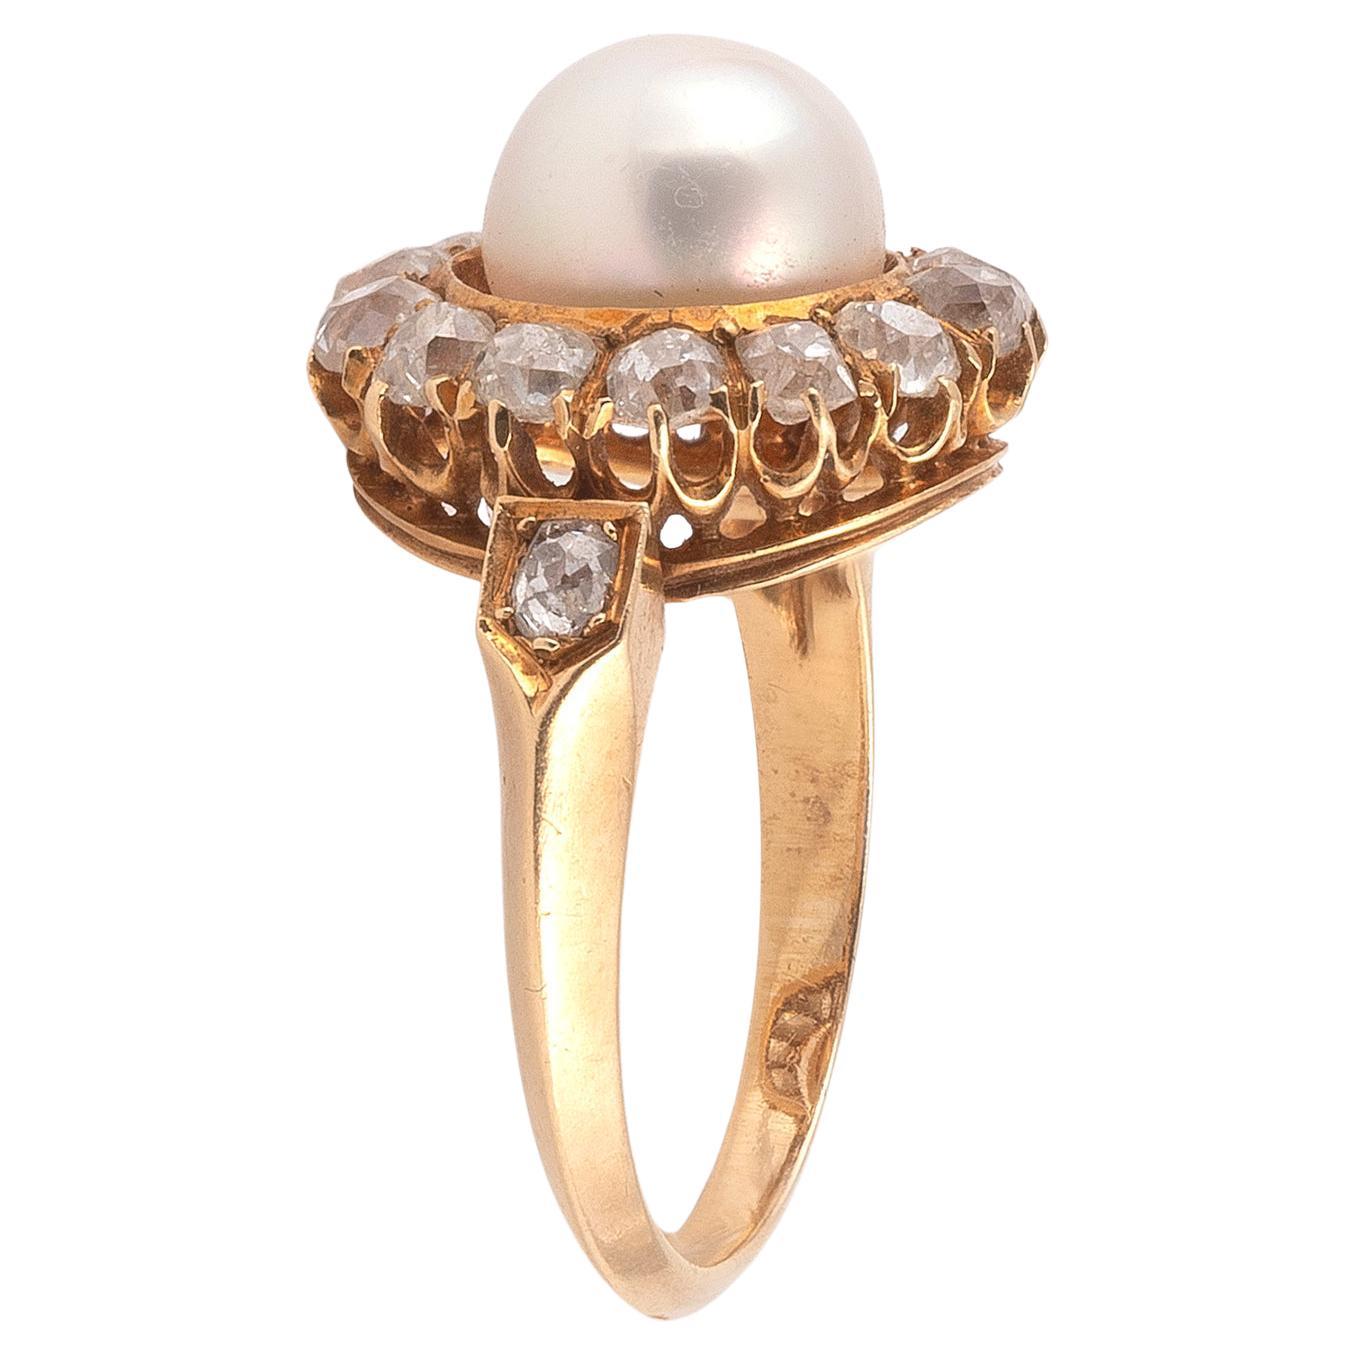 

Centering on a natural pearl within old cut diamond set frame, diamond set shoulders, mounted in gold, circa 1890
US ring size 7
Diamond Approximate total weight of 0.60 carats
Pearl Measuring approximately 7.8 mm
Marks French gold marks
Gross